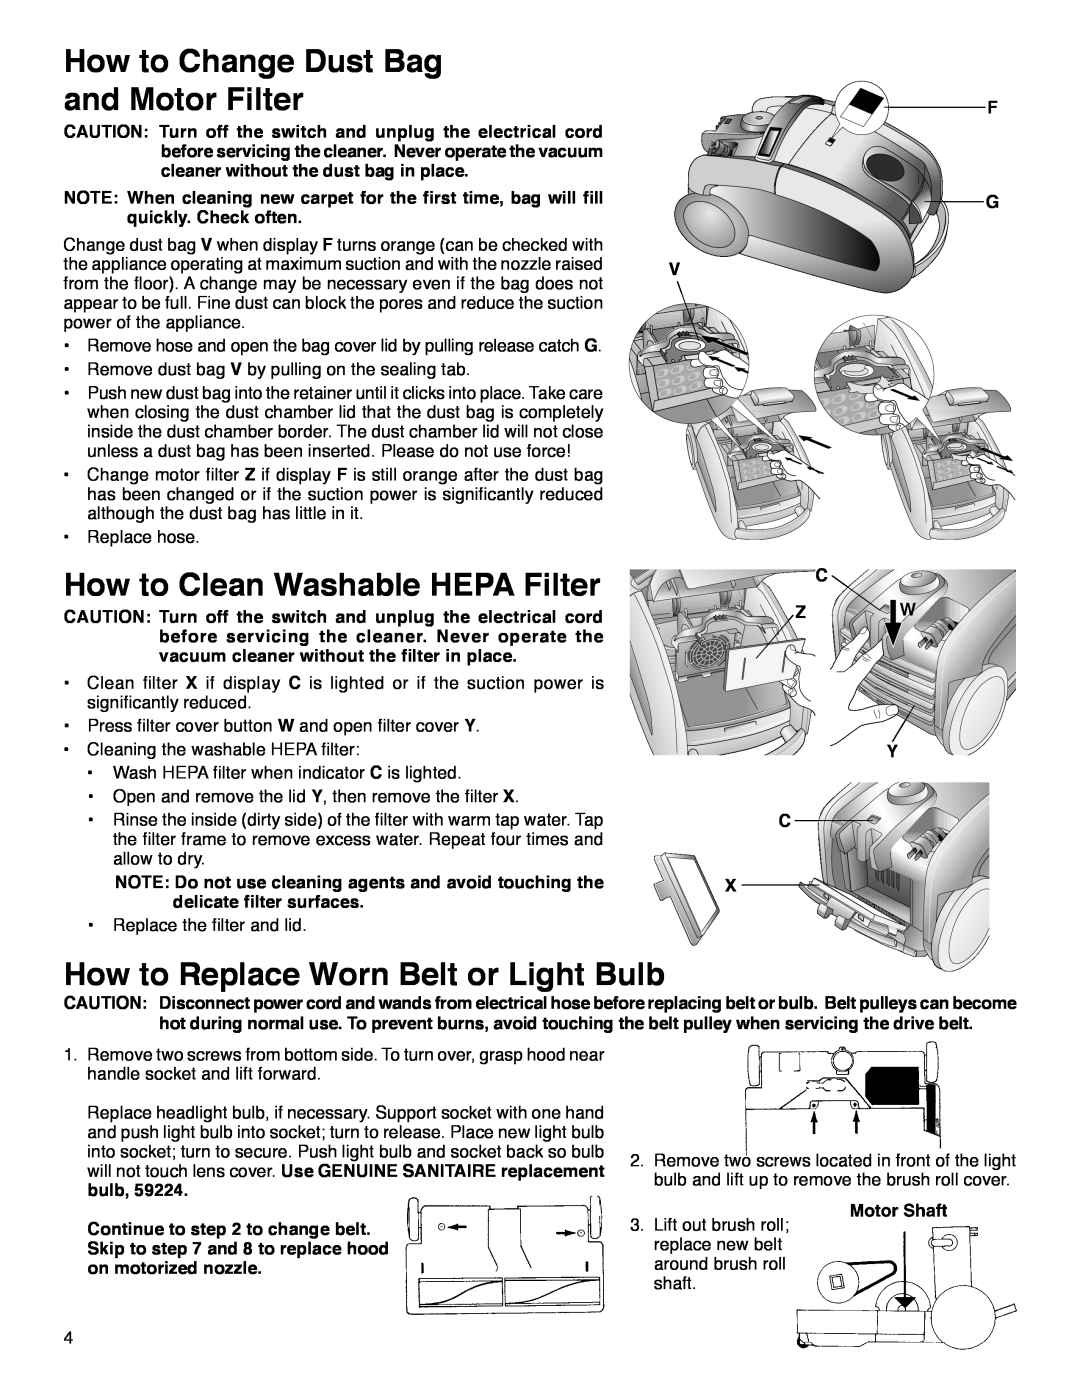 Sanitaire SP6952 warranty How to Change Dust Bag and Motor Filter, How to Clean Washable HEPA Filter 